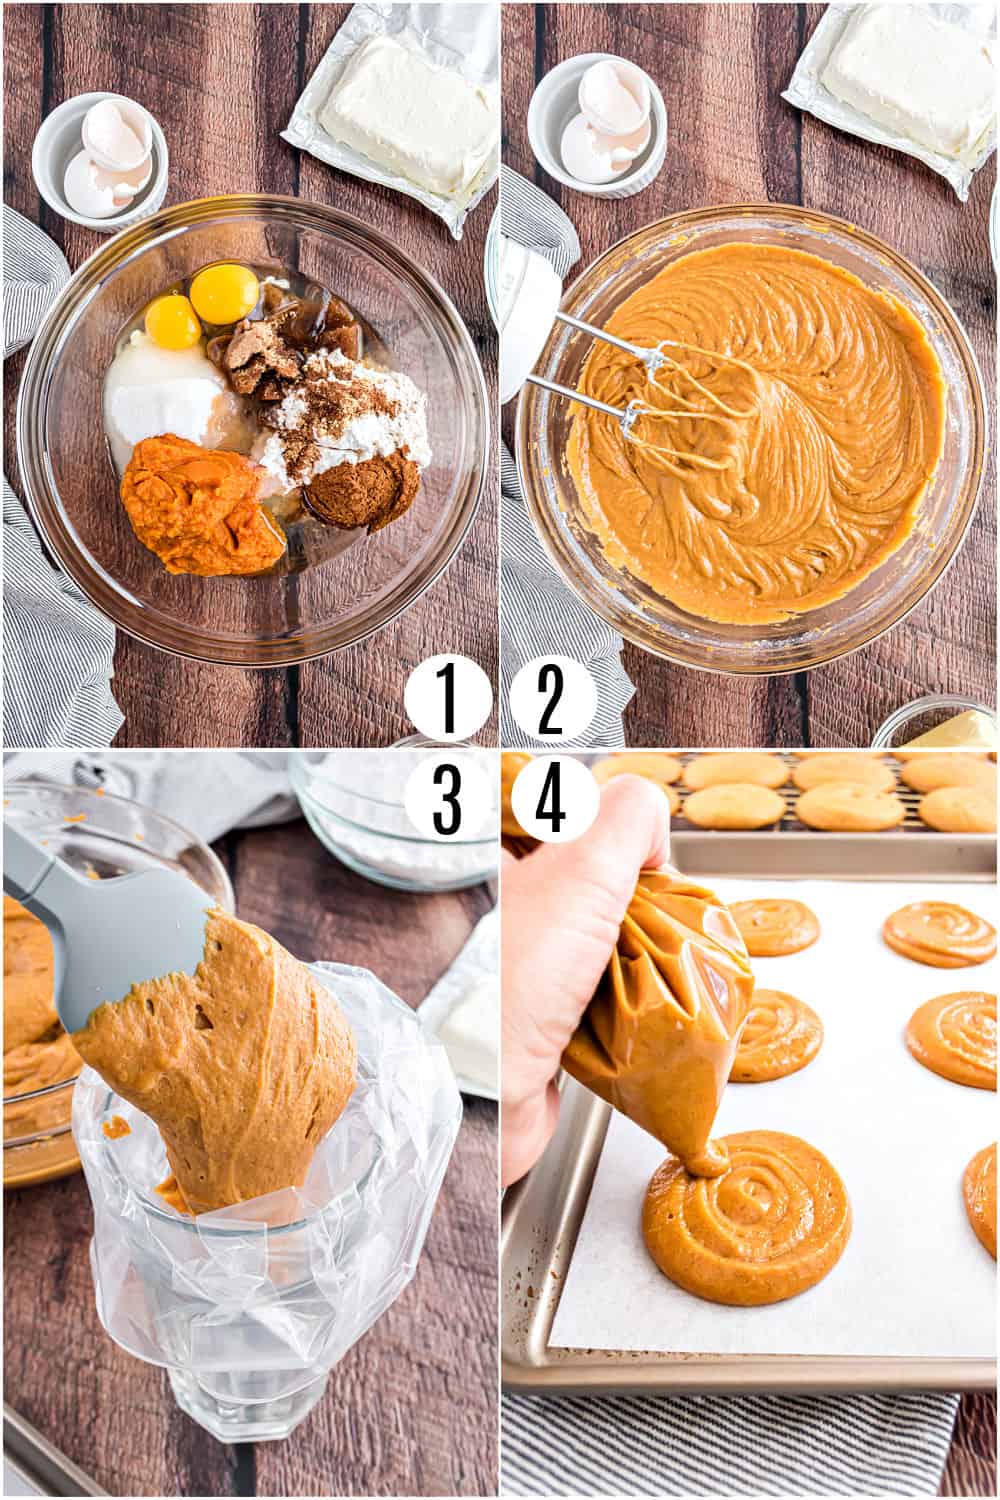 Step by step photos showing how to make pumpkin whoopie pies.